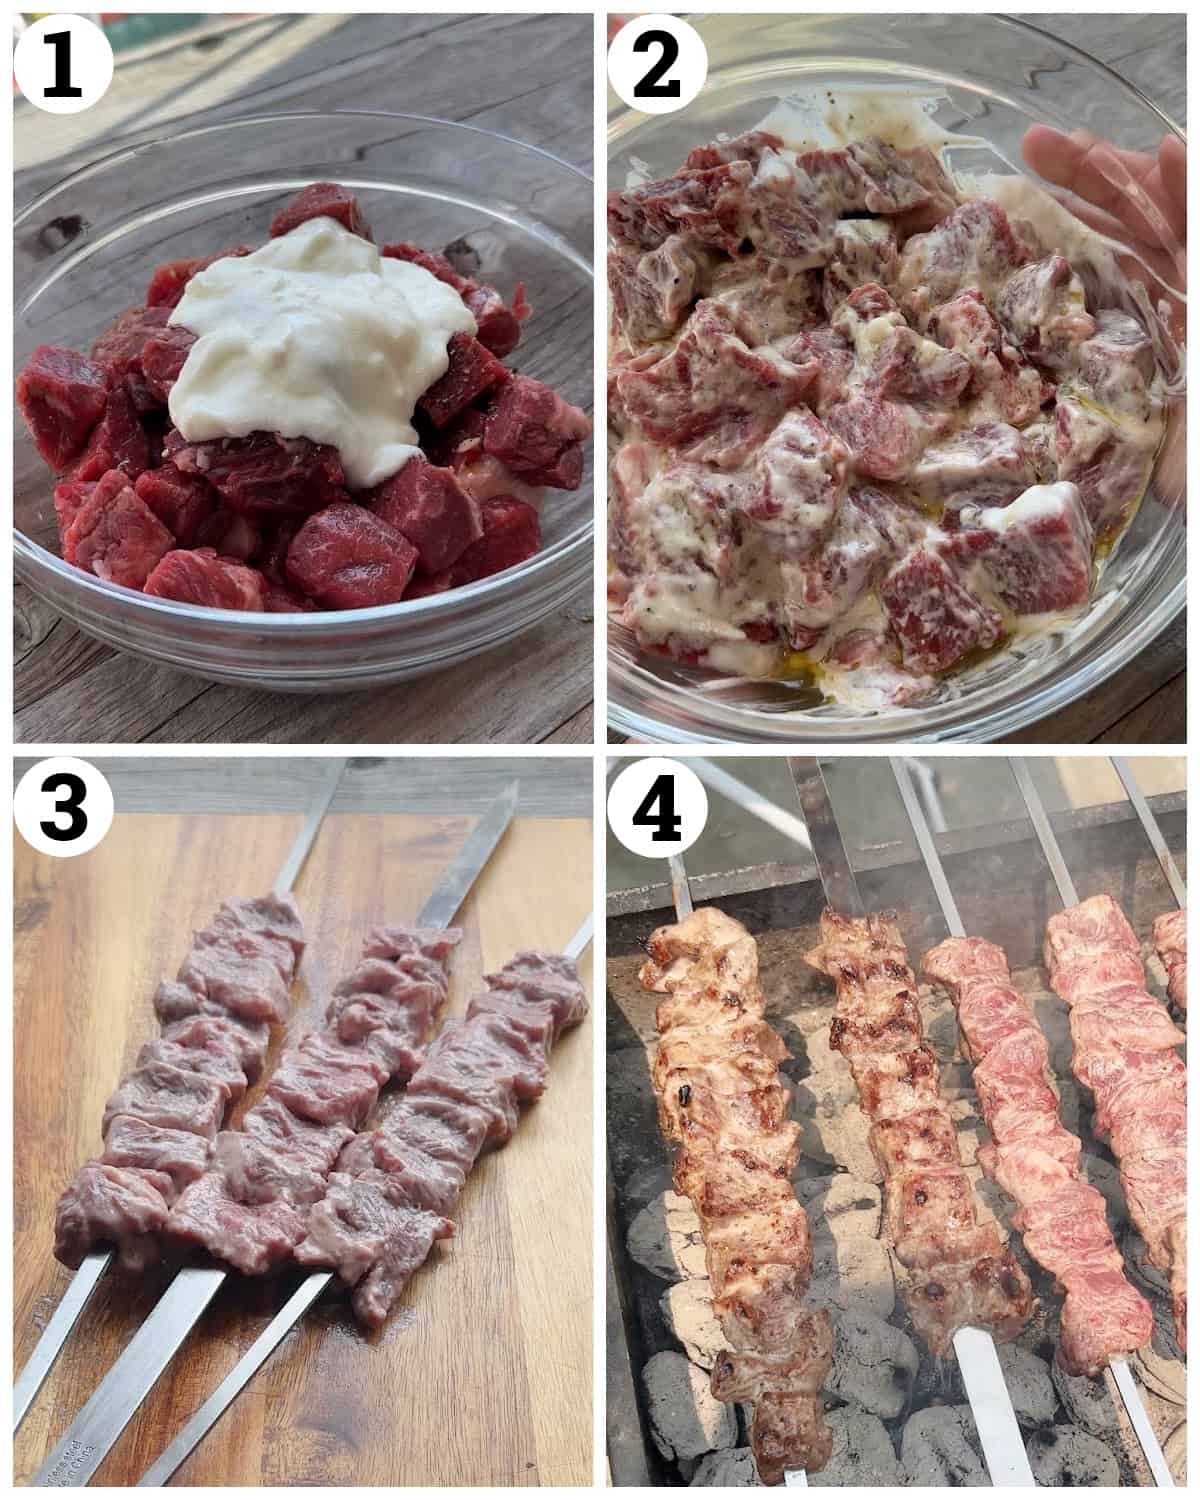 Marinate the meat in yogurt and olive oil then grill. 